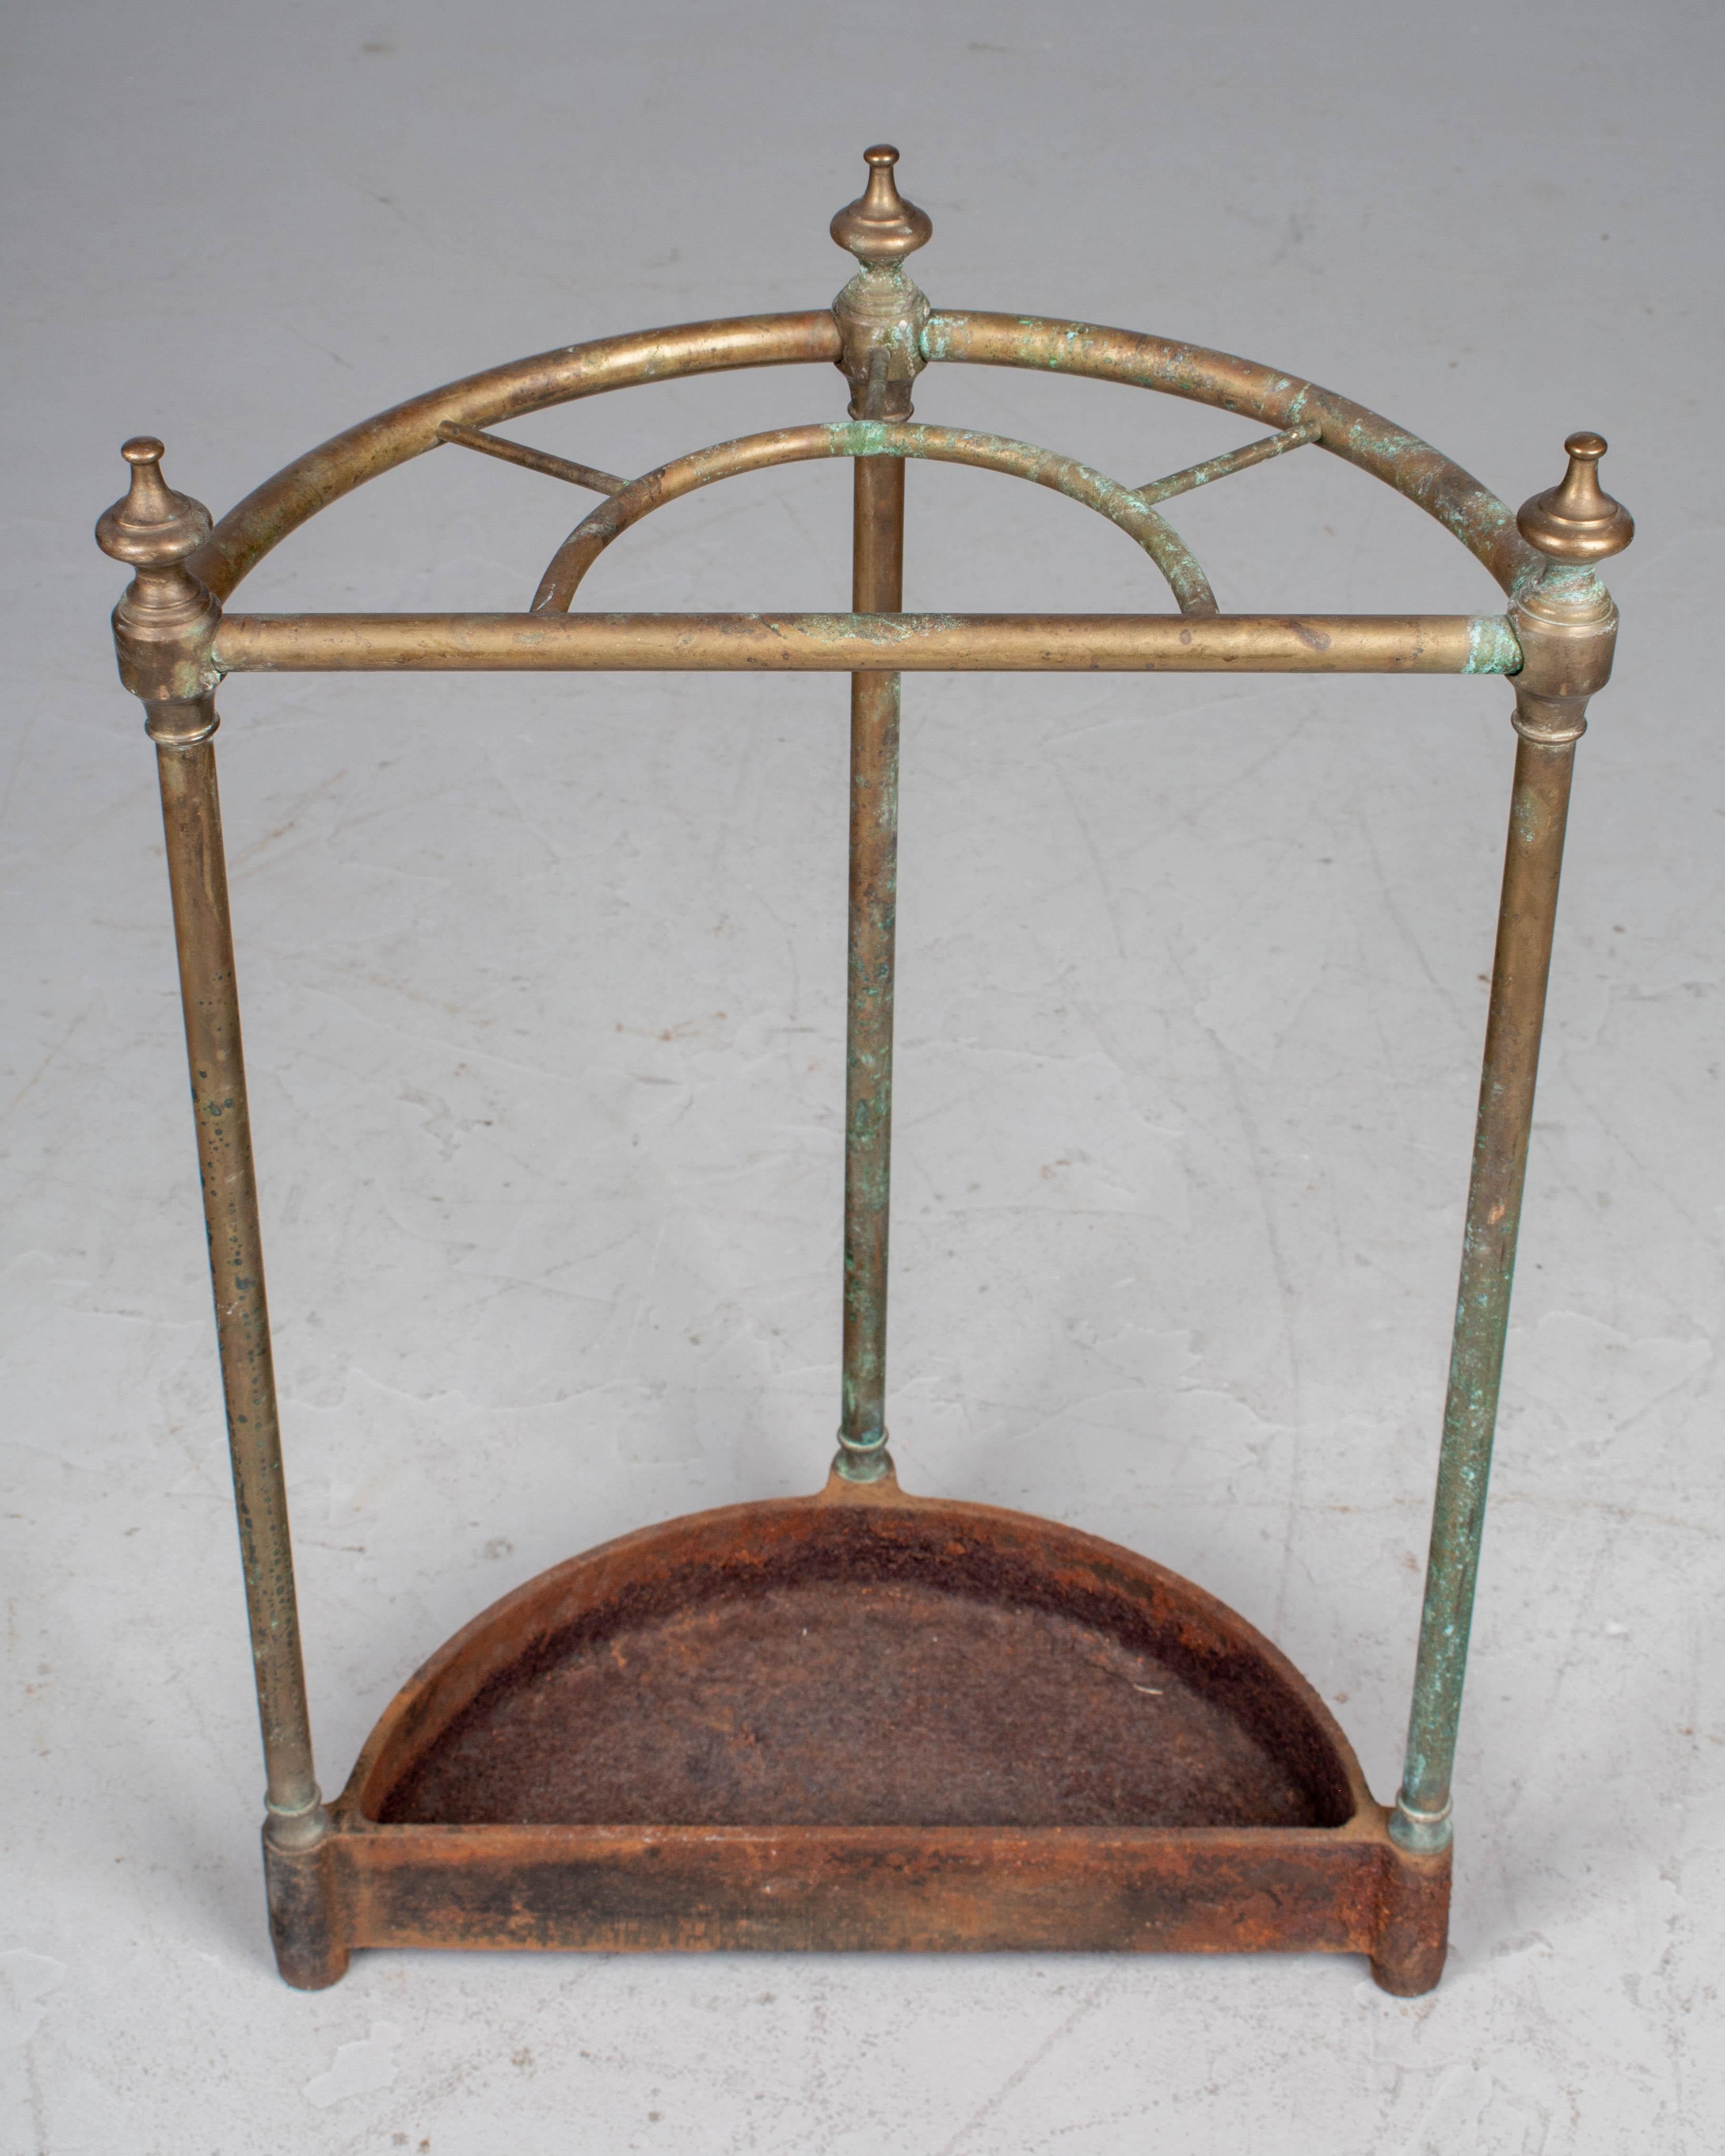 A French brass and cast iron umbrella stand. Demilune form with brass tubing and decorative finials. Cast iron drip tray base is heavily rusted with remnants of black showing through. Beautiful old patina. 
More photos available upon request. We